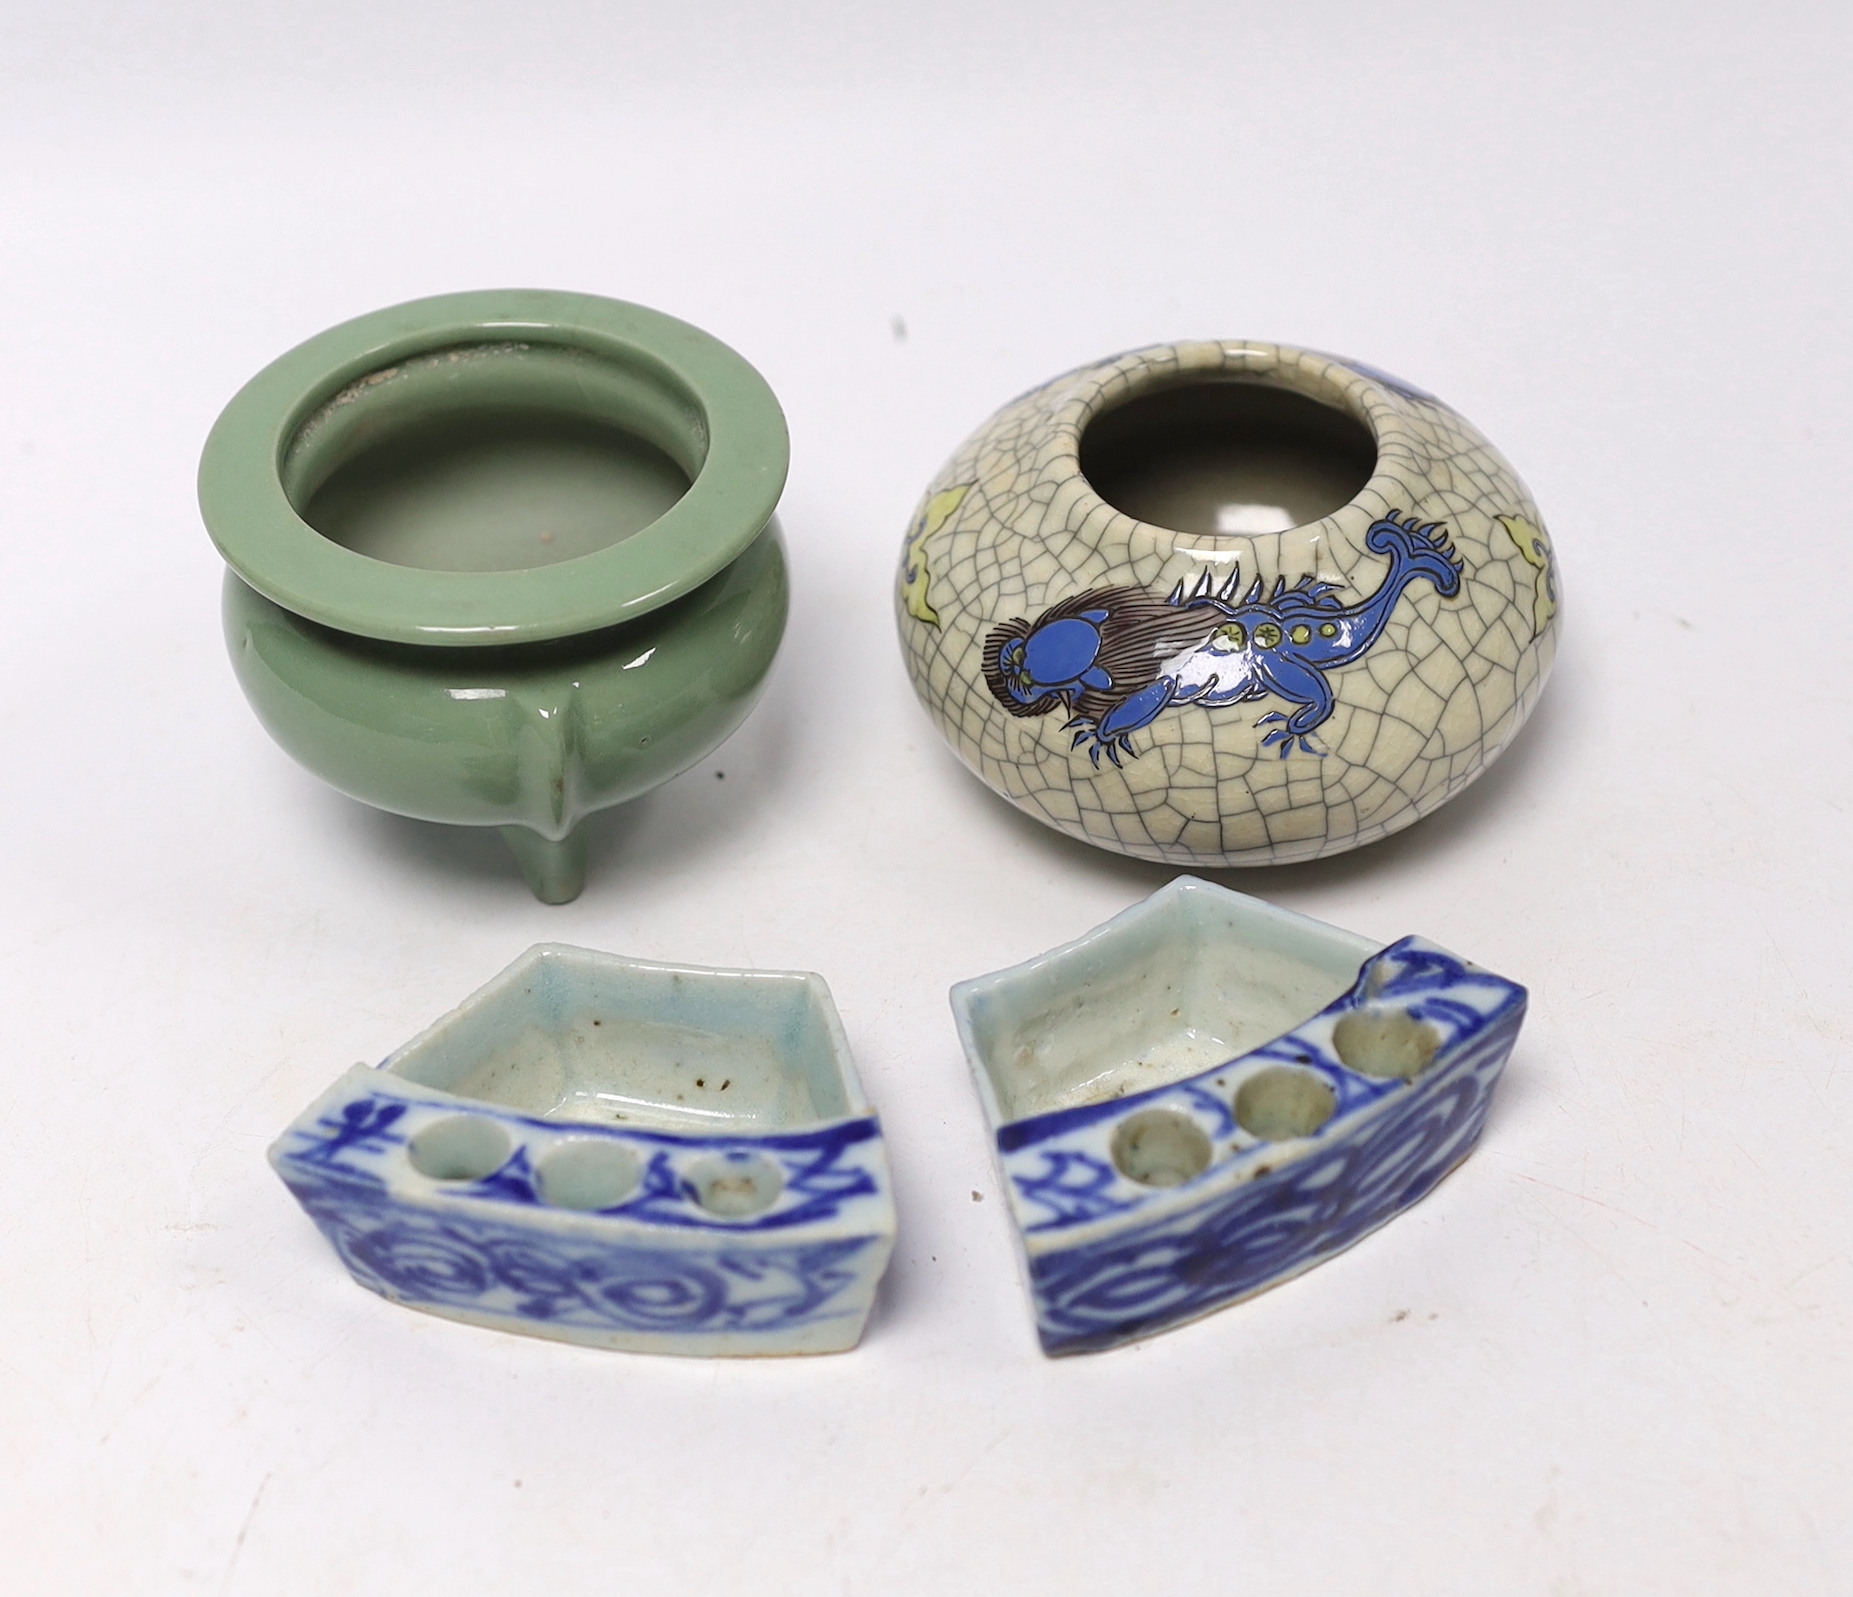 Four Chinese ceramic items; a celadon glazed tripod censer, a miniature vase and two incense holders, censer 5.5cm high                                                                                                     